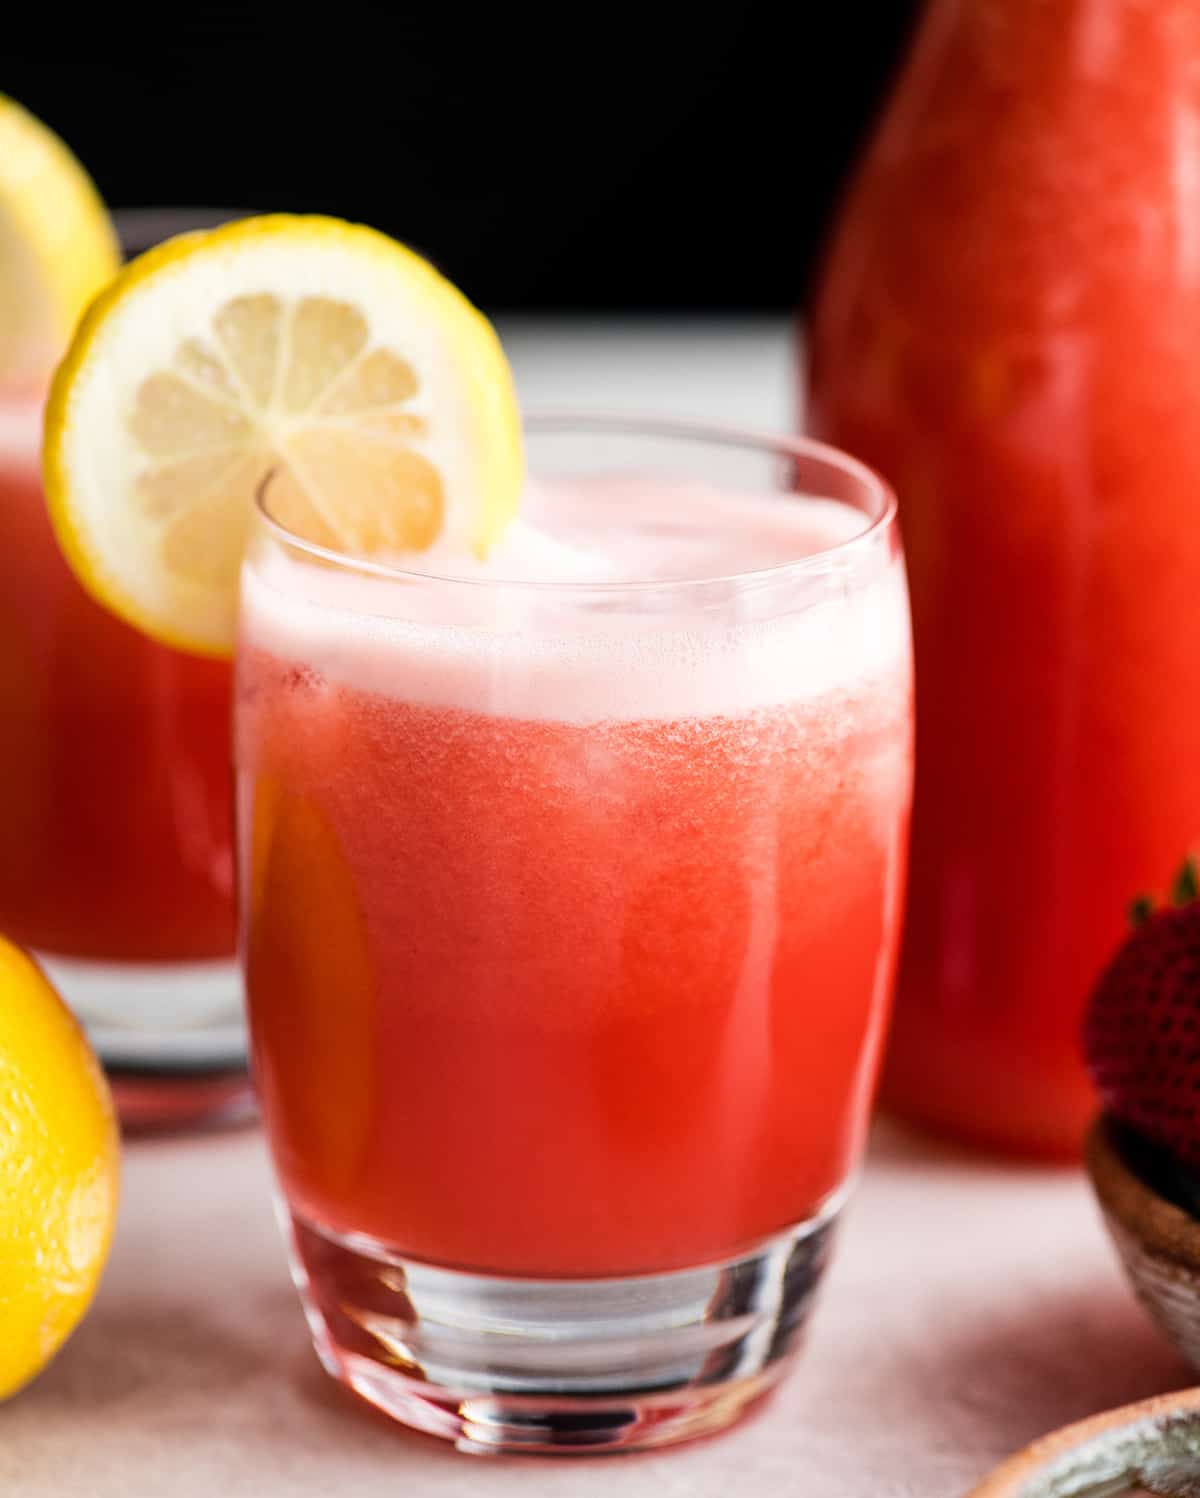 front view of a glass of Homemade Strawberry Lemonade with a lemon slice on the rim of the glass